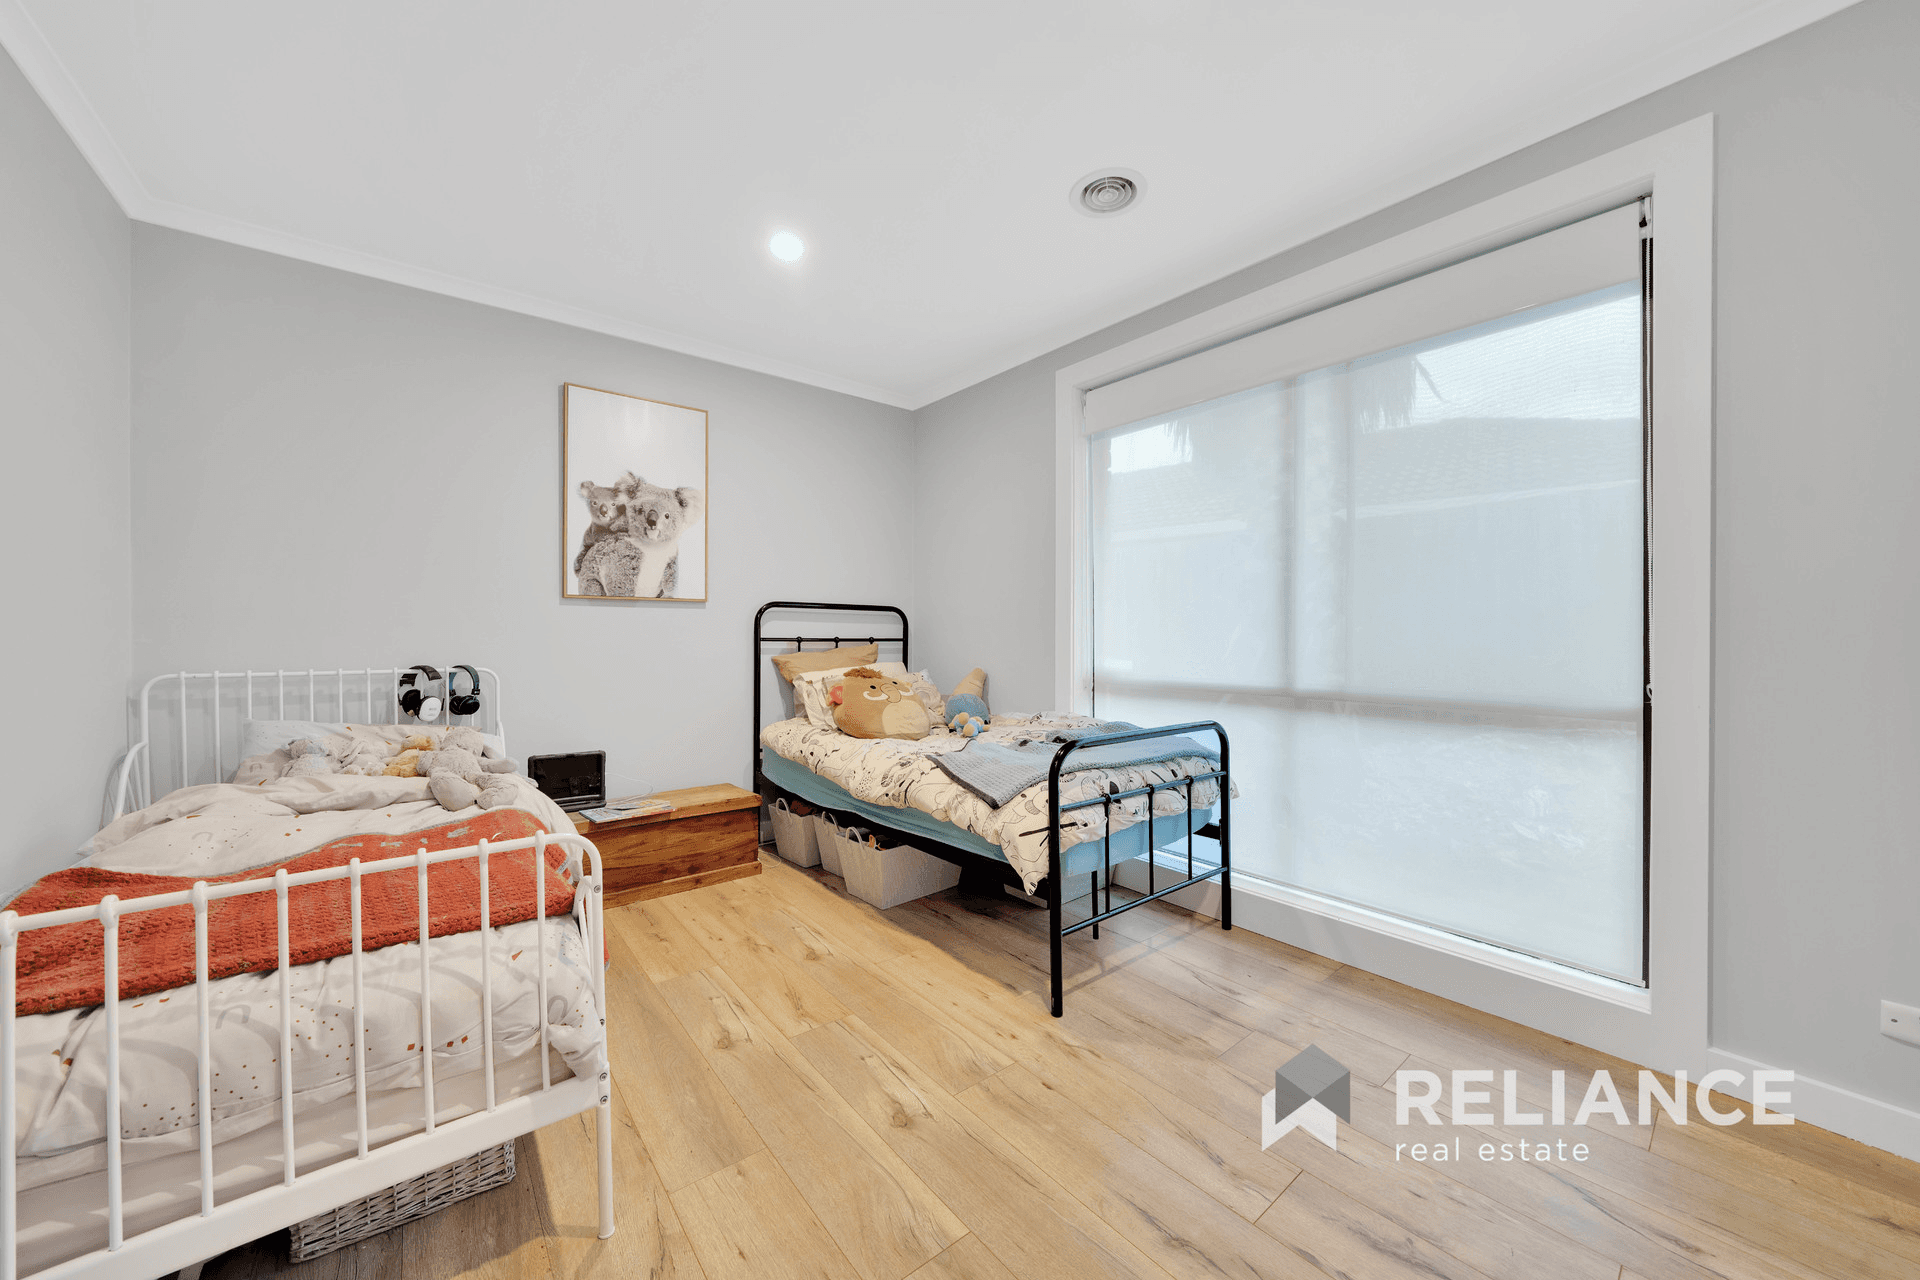 13 St Anns Court, Hoppers Crossing, VIC 3029